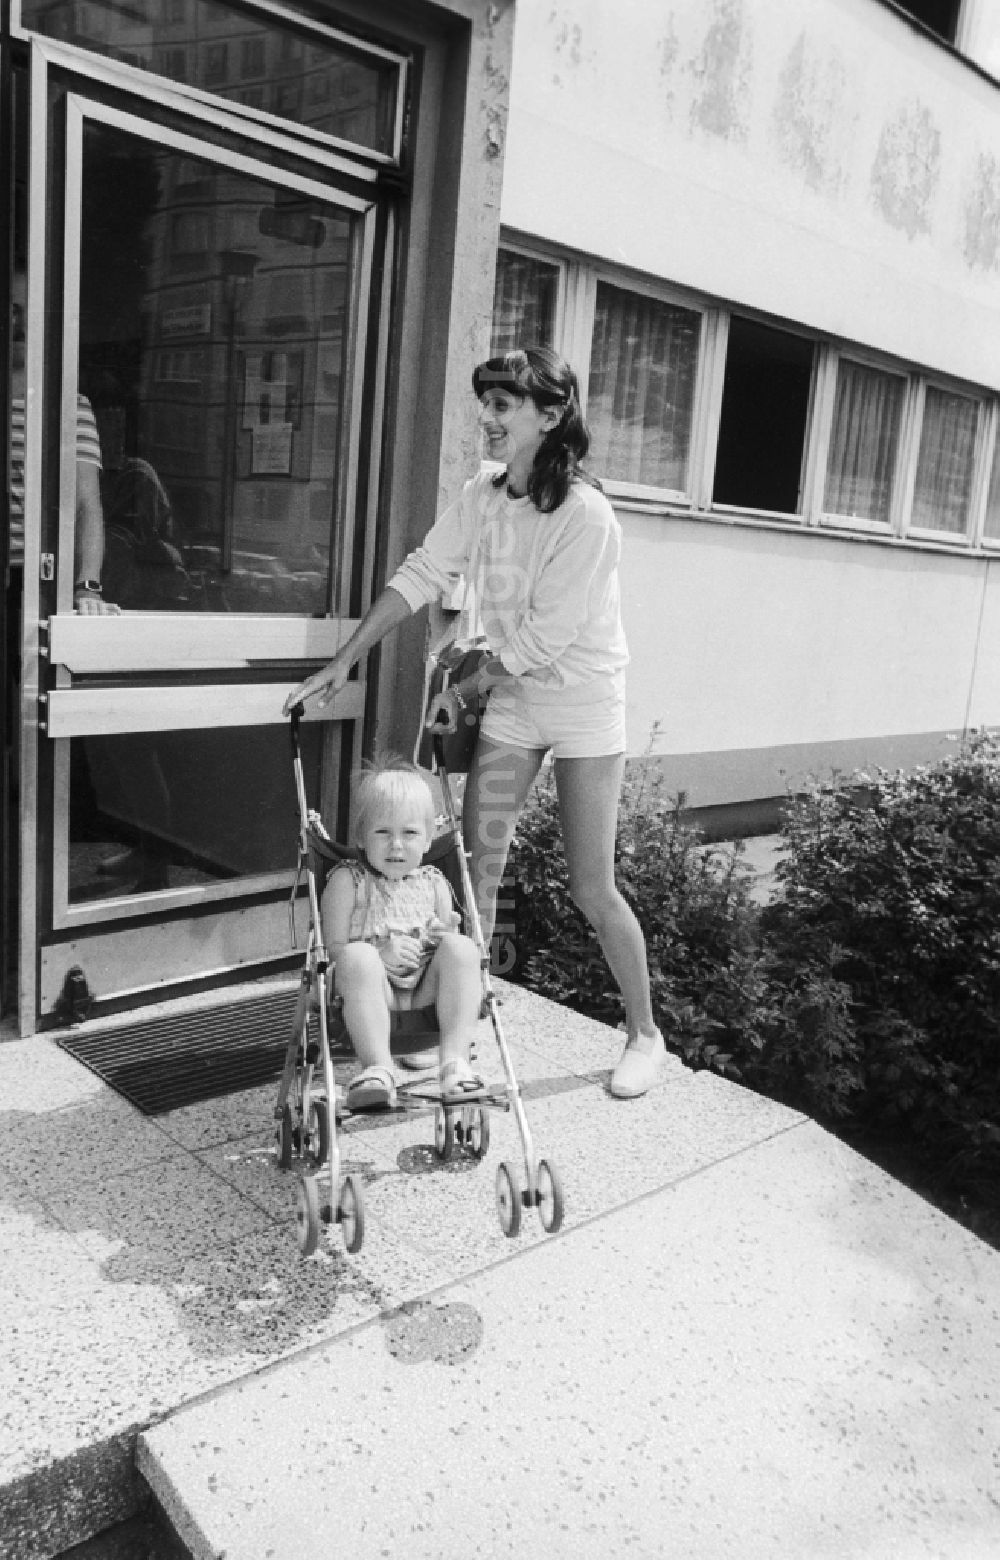 GDR photo archive: Berlin - A mother brings her child in the baby carriage in the cradle in Berlin, the former capital of the GDR, German democratic republic